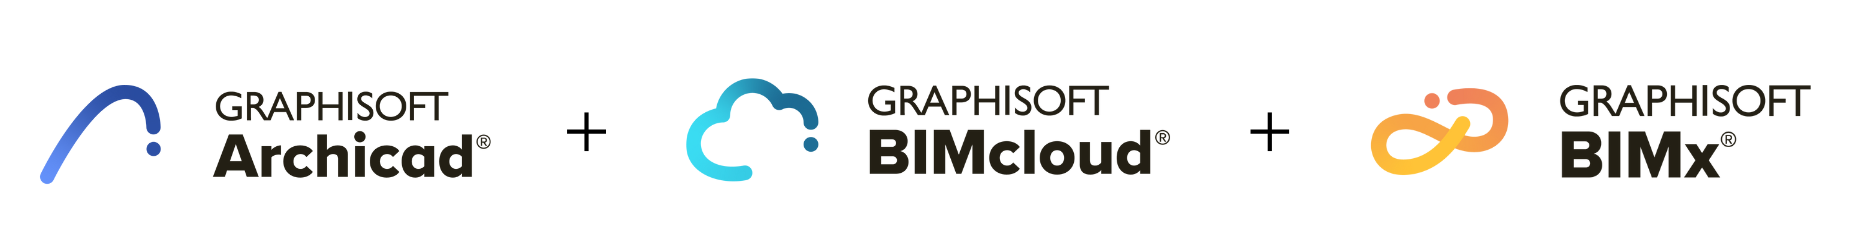 Upgrade to BIM with Archicad Collaborate